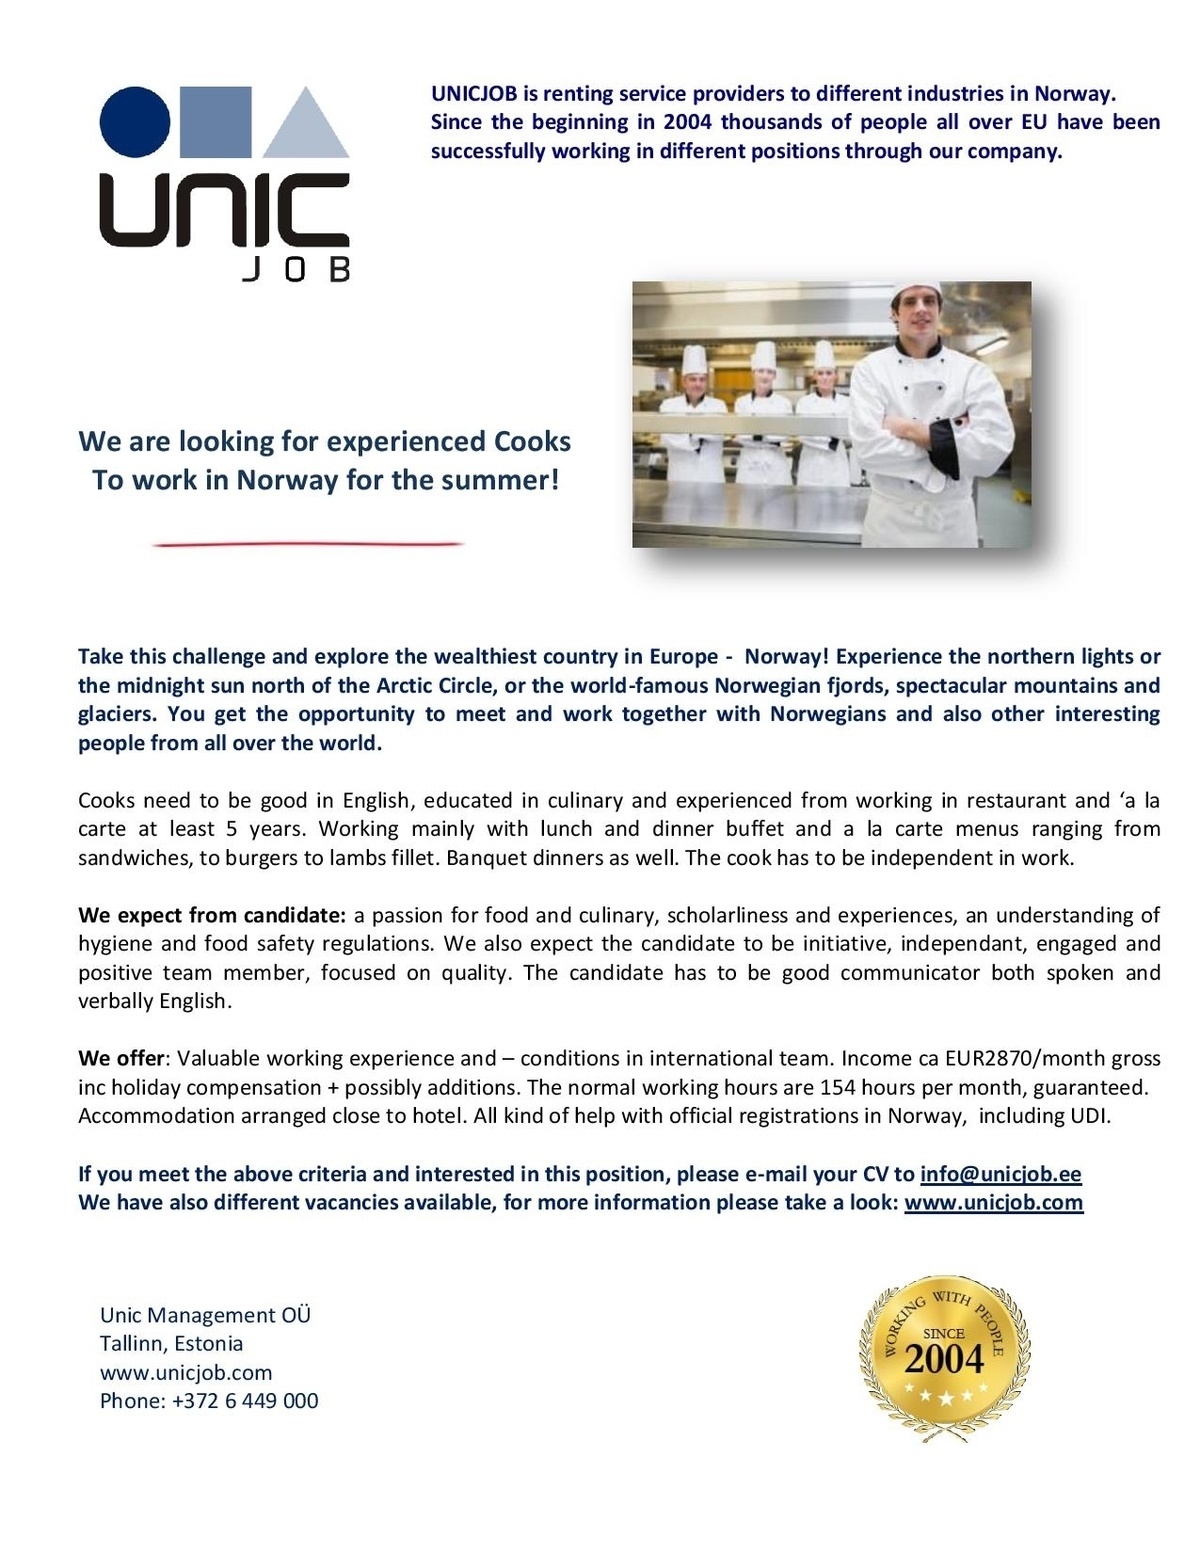 Unic Management OÜ Experienced cooks to work in Norway for the summer